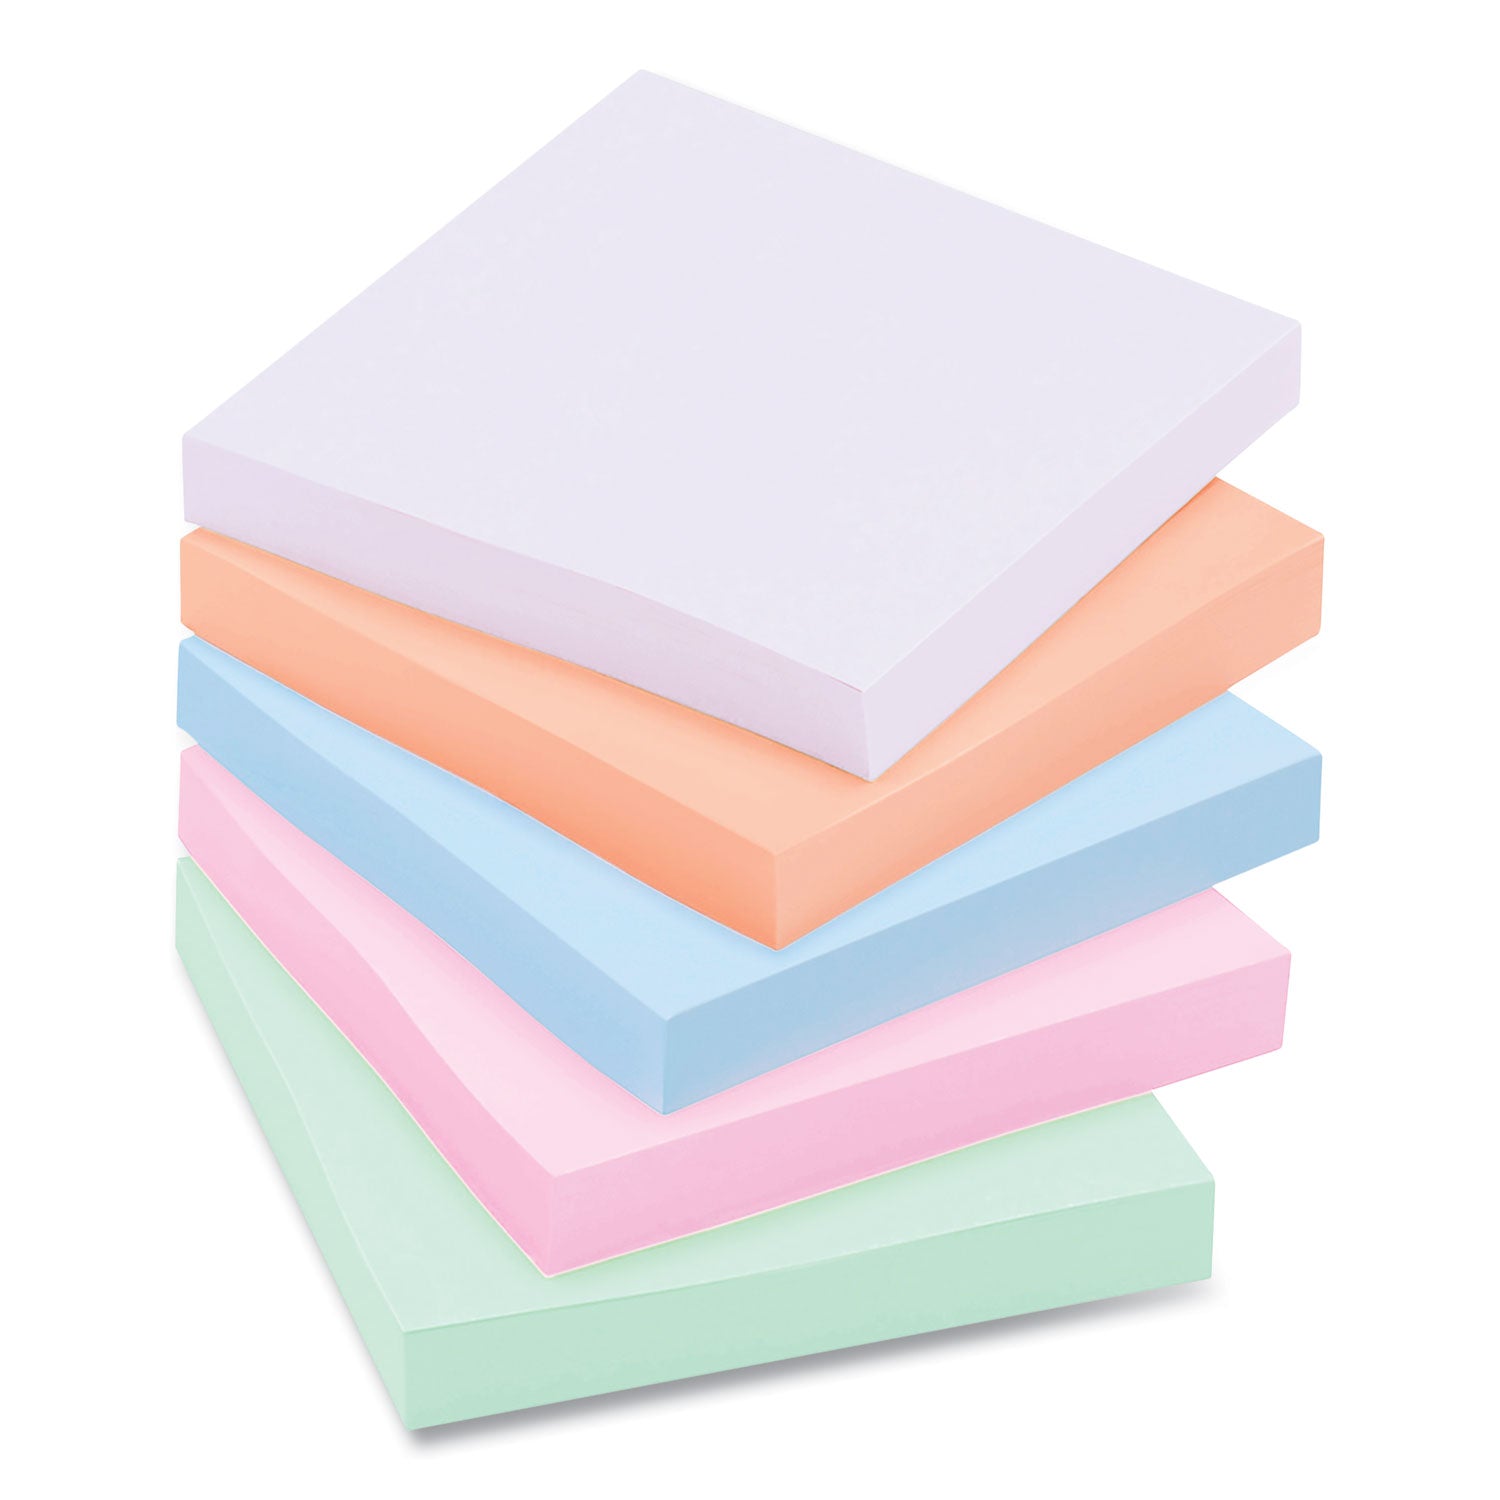 recycled-notes-in-wanderlust-pastels-collection-colors-3-x-3-65-sheets-pad-6-pads-pack_mmm70005132637 - 2